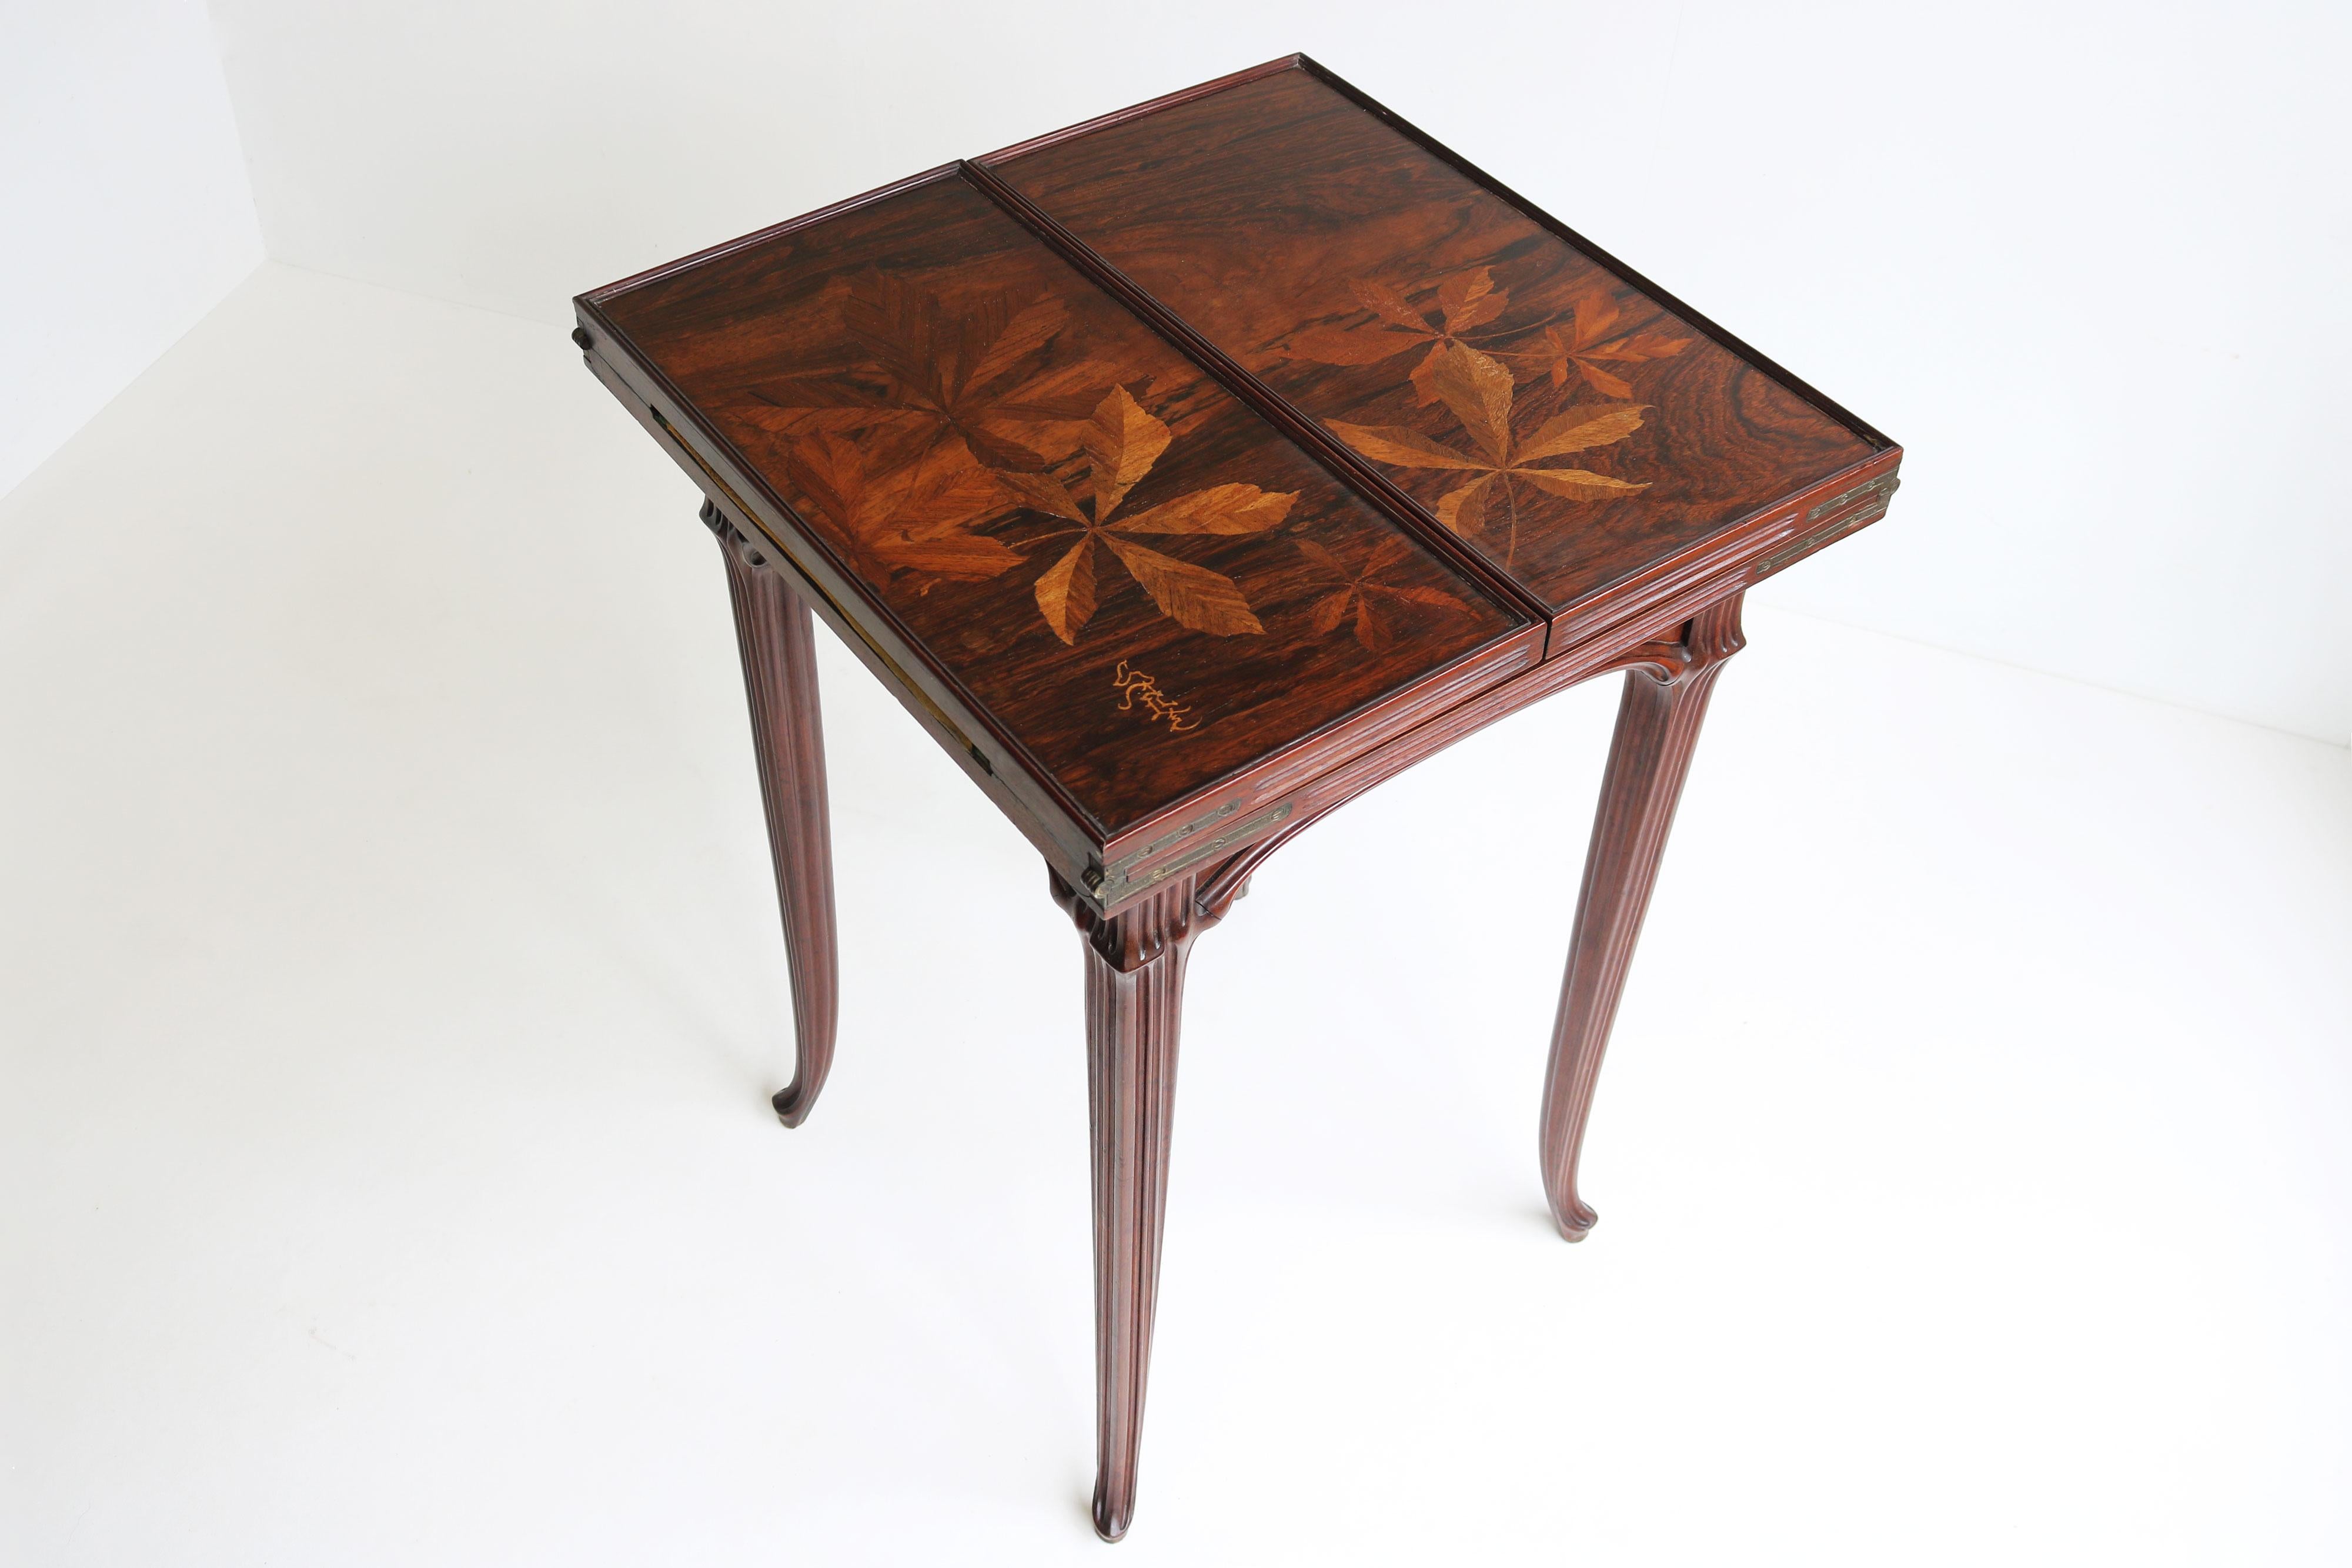 Hand-Carved Original French Art Nouveau game table / side table by Emile Gallé 1905 chestnut For Sale